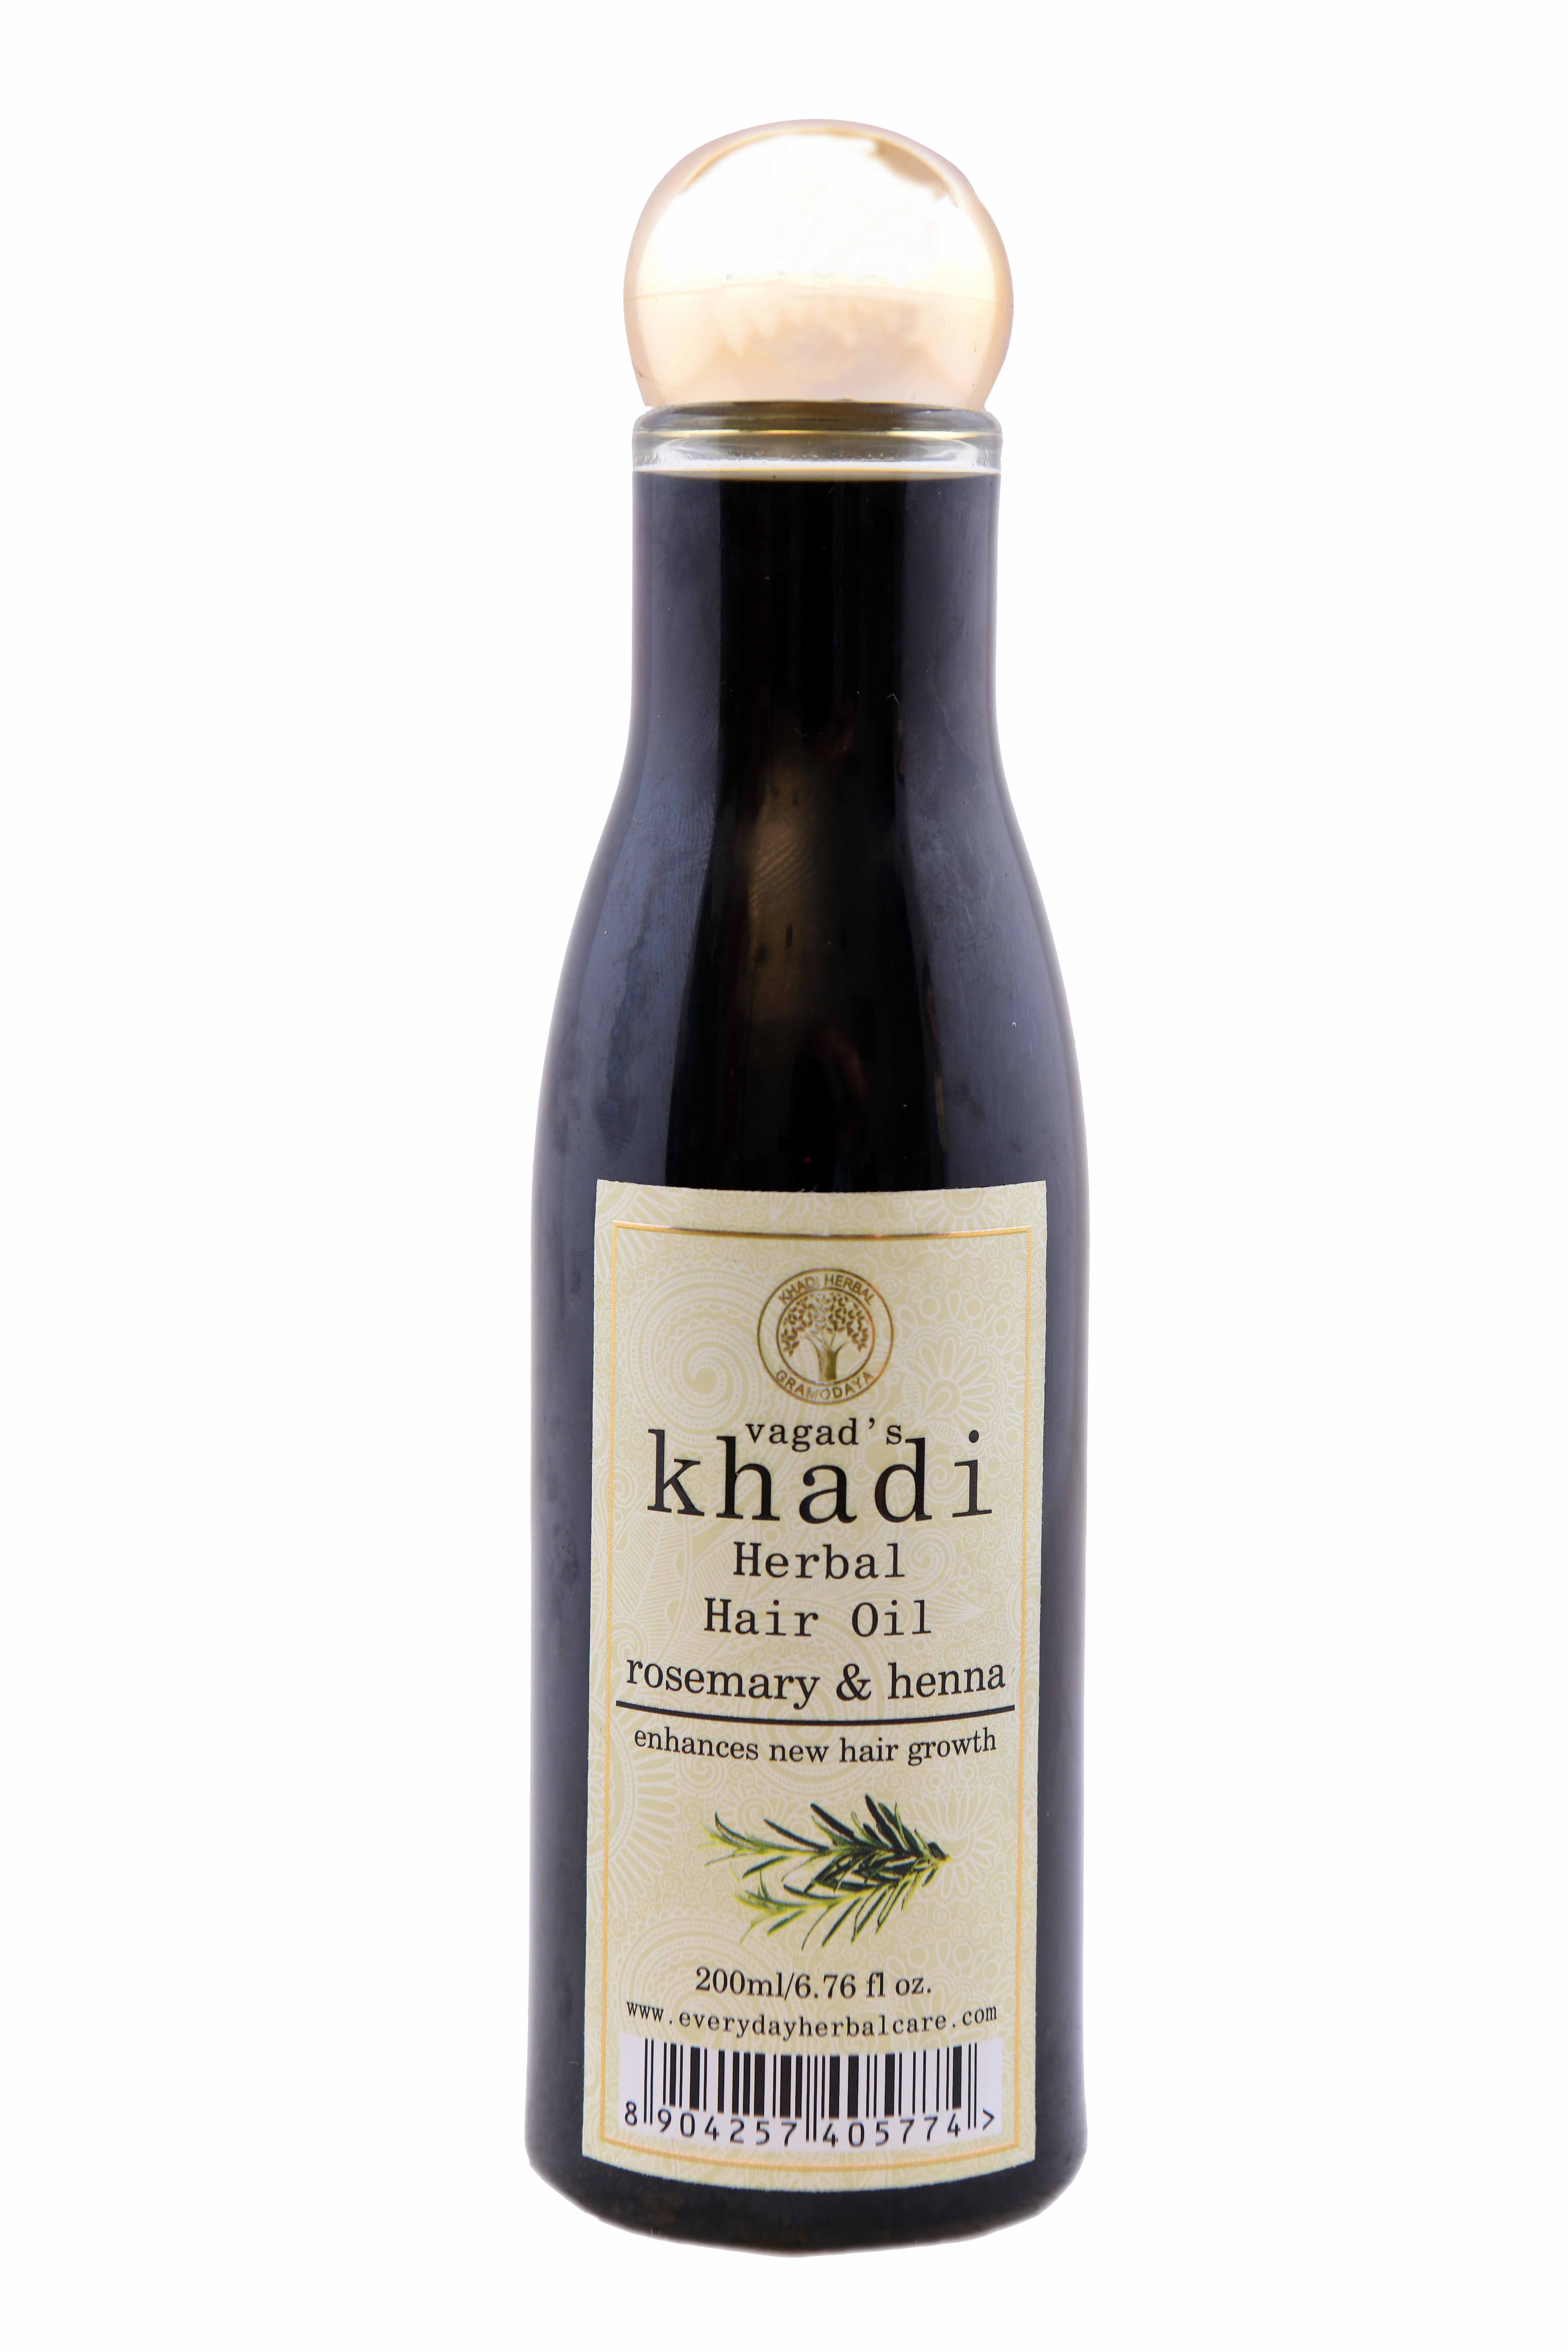 Buy Vagad's Khadi Rosemary And Henna Hair Oil at Best Price Online